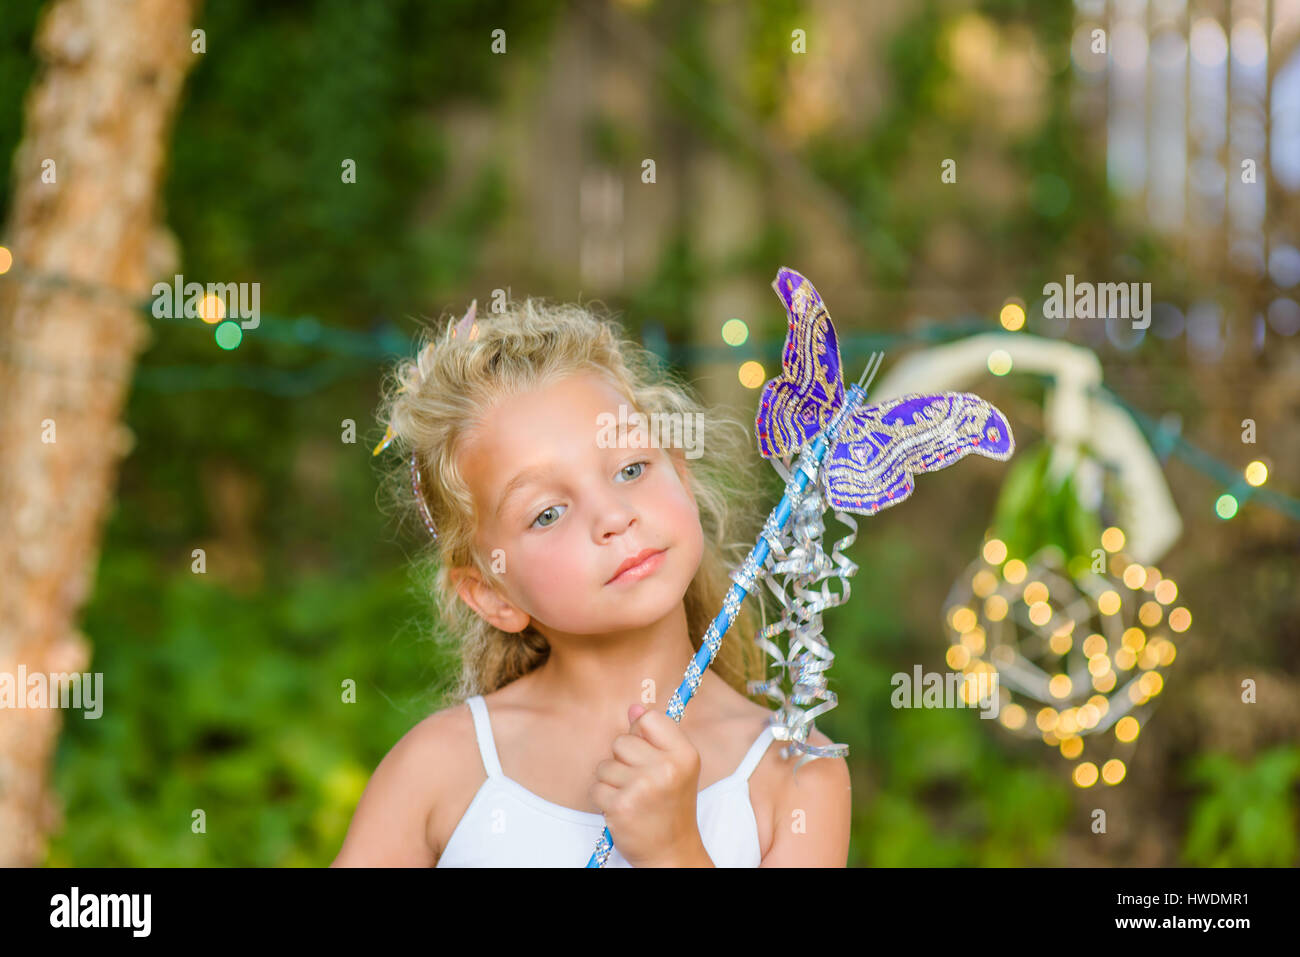 Portrait of young girl holding butterfly wand Stock Photo